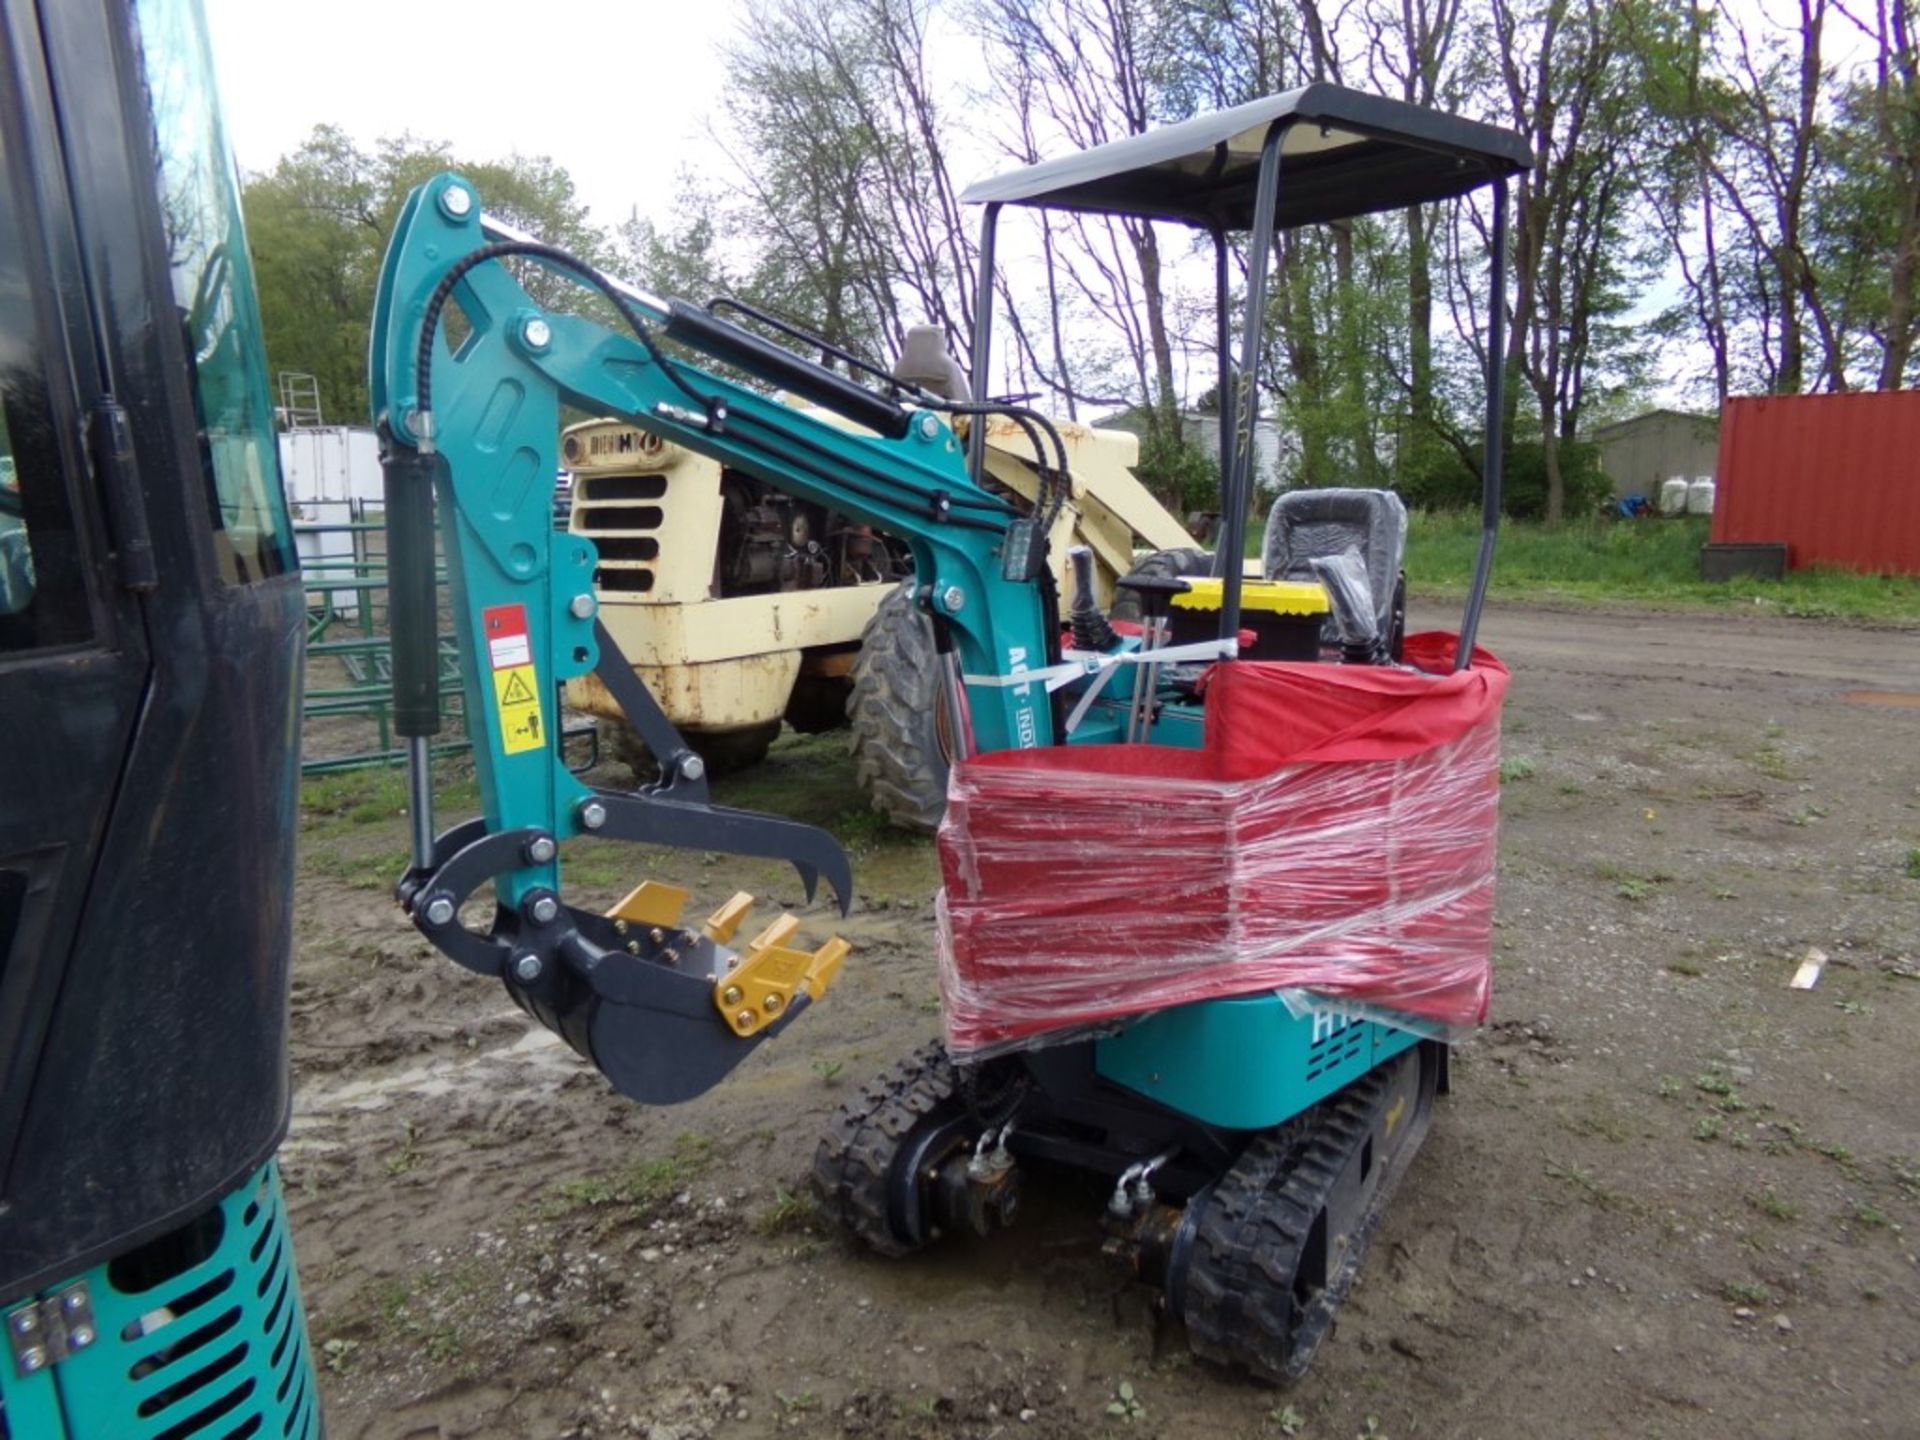 New AGT Industrial H15 Mini Excavator with Open Cab, Canopy,Green/Blue Grader Blade, Stationary